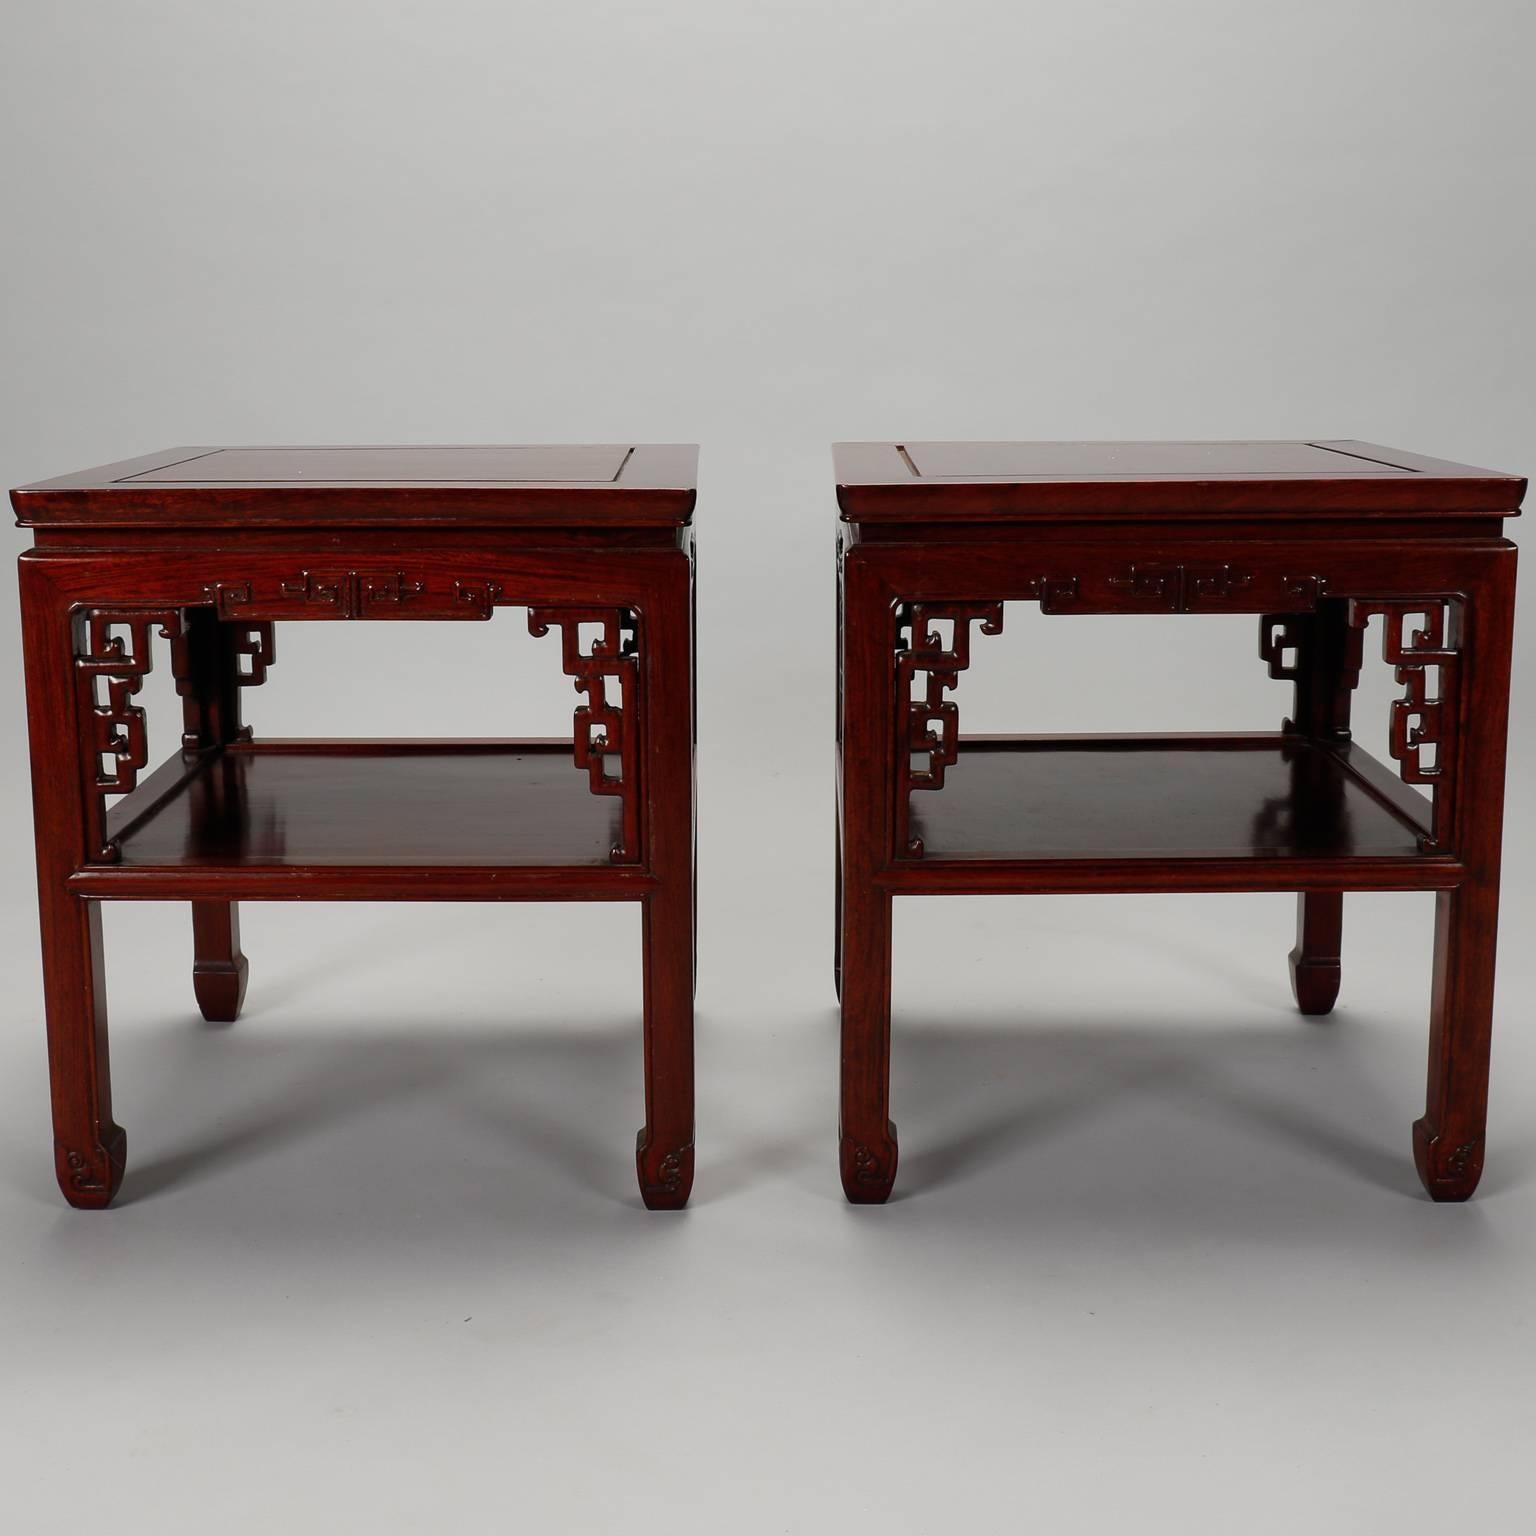 Pair of circa 1930s square Chinese wood side tables have lower shelf and decorative carved elements on the apron and corners. Unknown wood with red hued stain. Sold and priced as a pair. Other pieces from this set available at the time of this